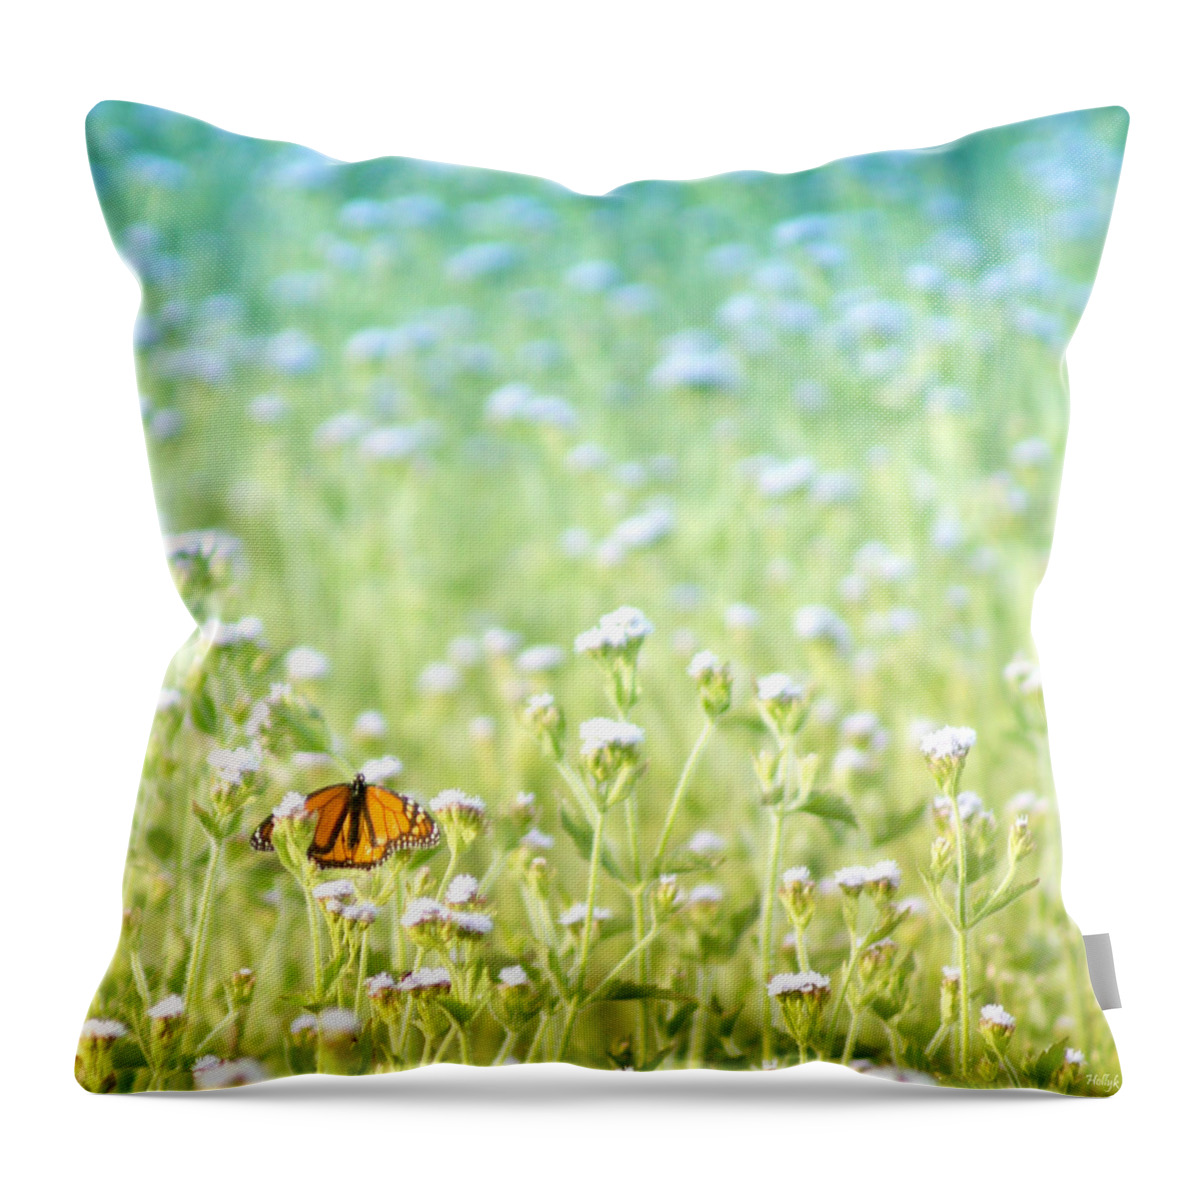 Butterfly Throw Pillow featuring the photograph Butterfly Dreams by Holly Kempe